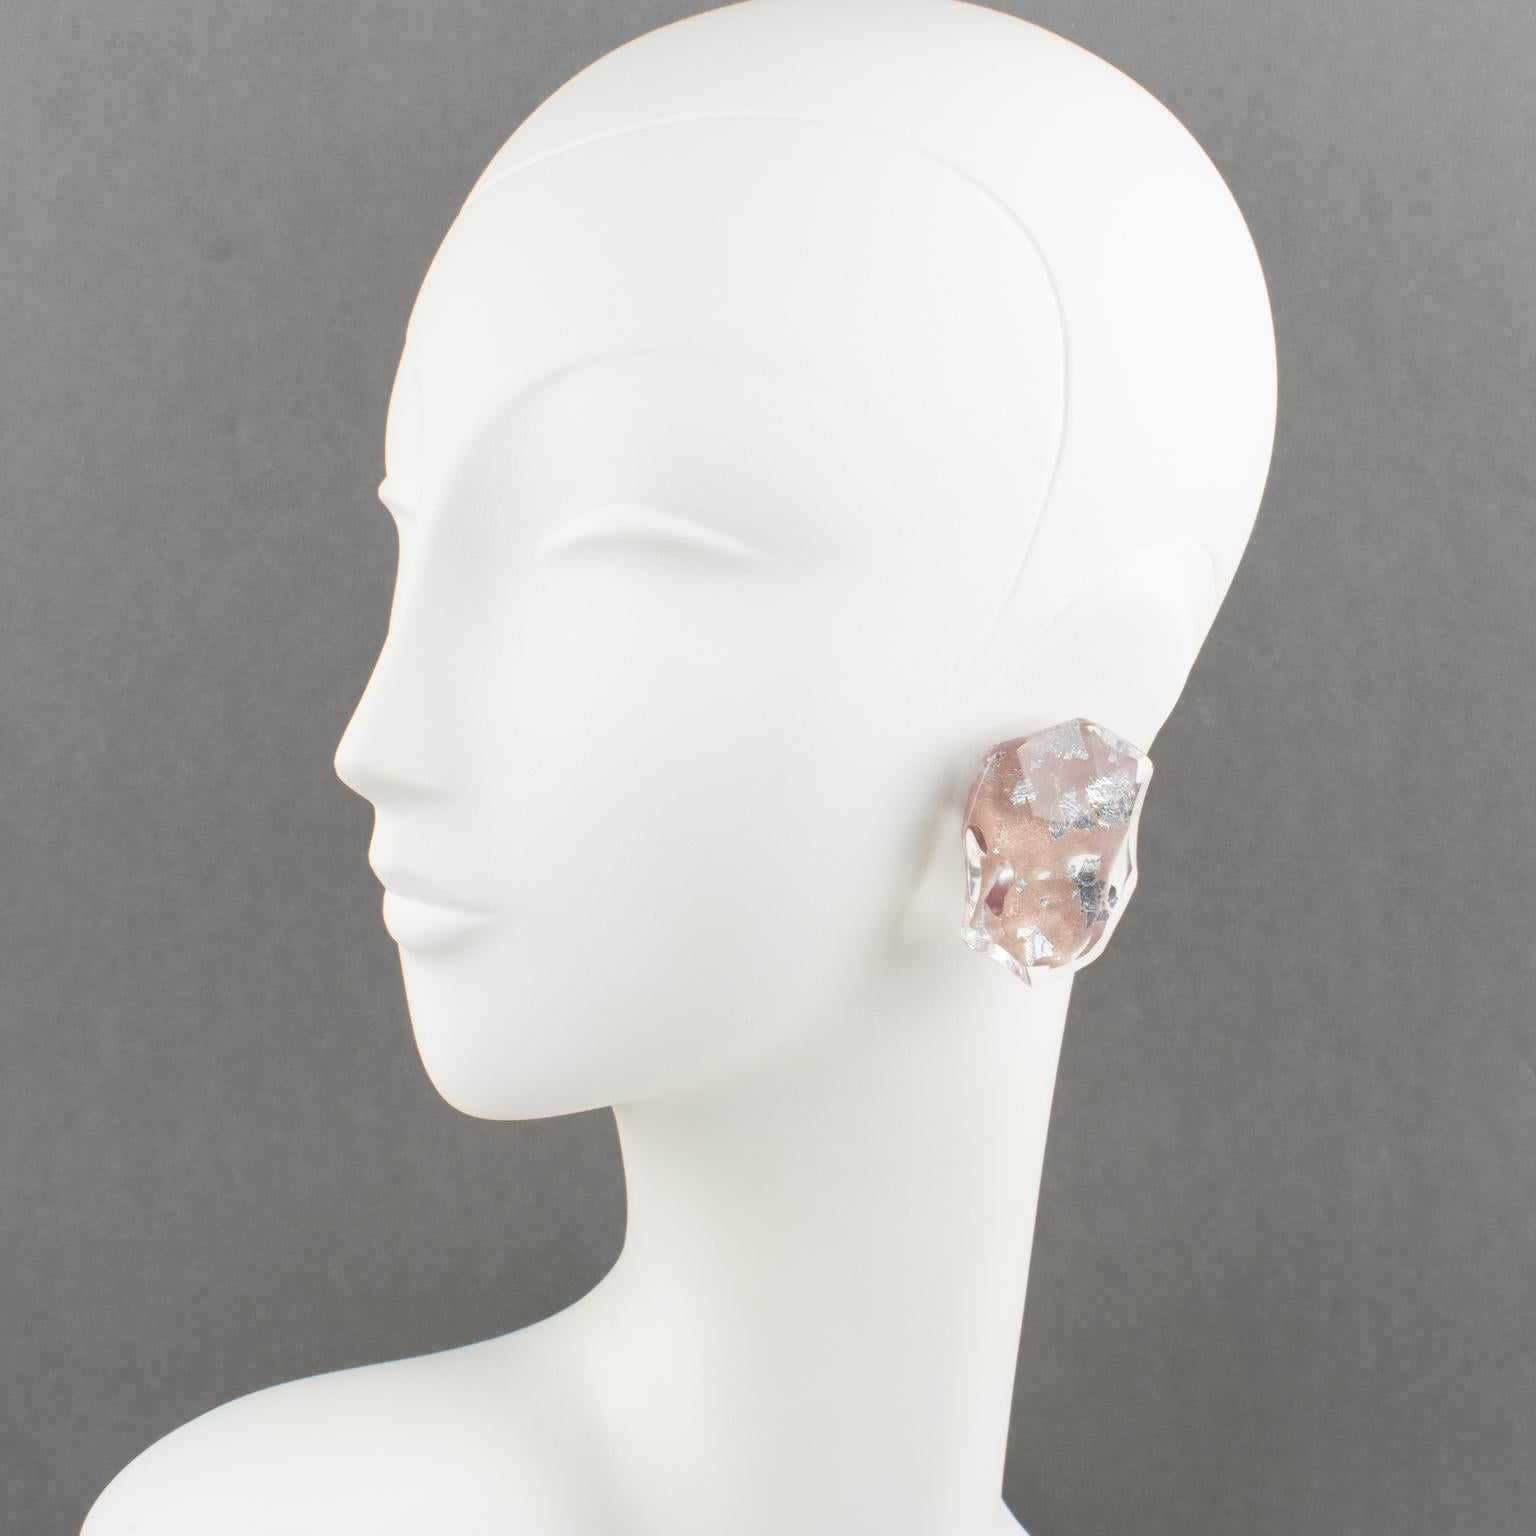 Harriet Bauknight for Kaso designed these exquisite Lucite clip-on earrings. The dimensional Lucite pebble shape has an asymmetric design and beveling. Silver and pink gold colors foil inclusions are set in the clear Lucite. The Kaso paper sticker